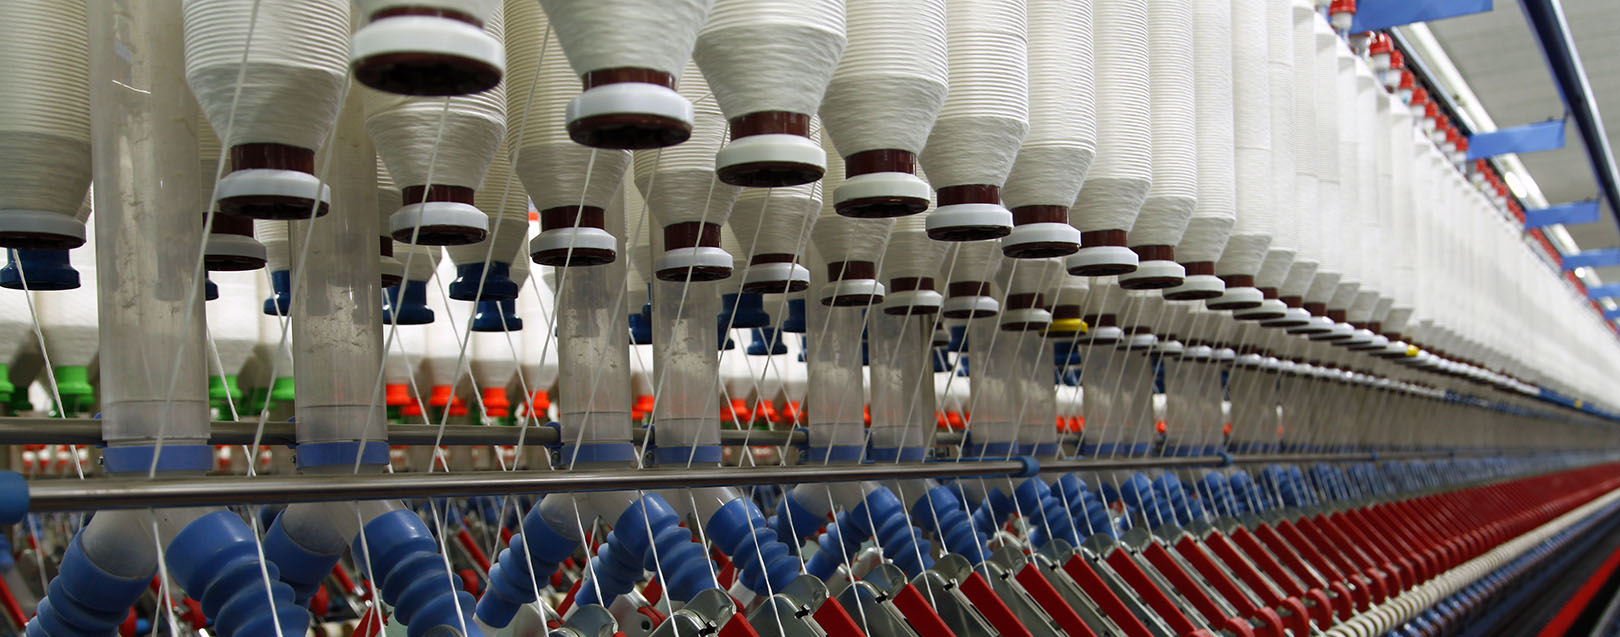 5,000 cr investments to flow in apparel industry